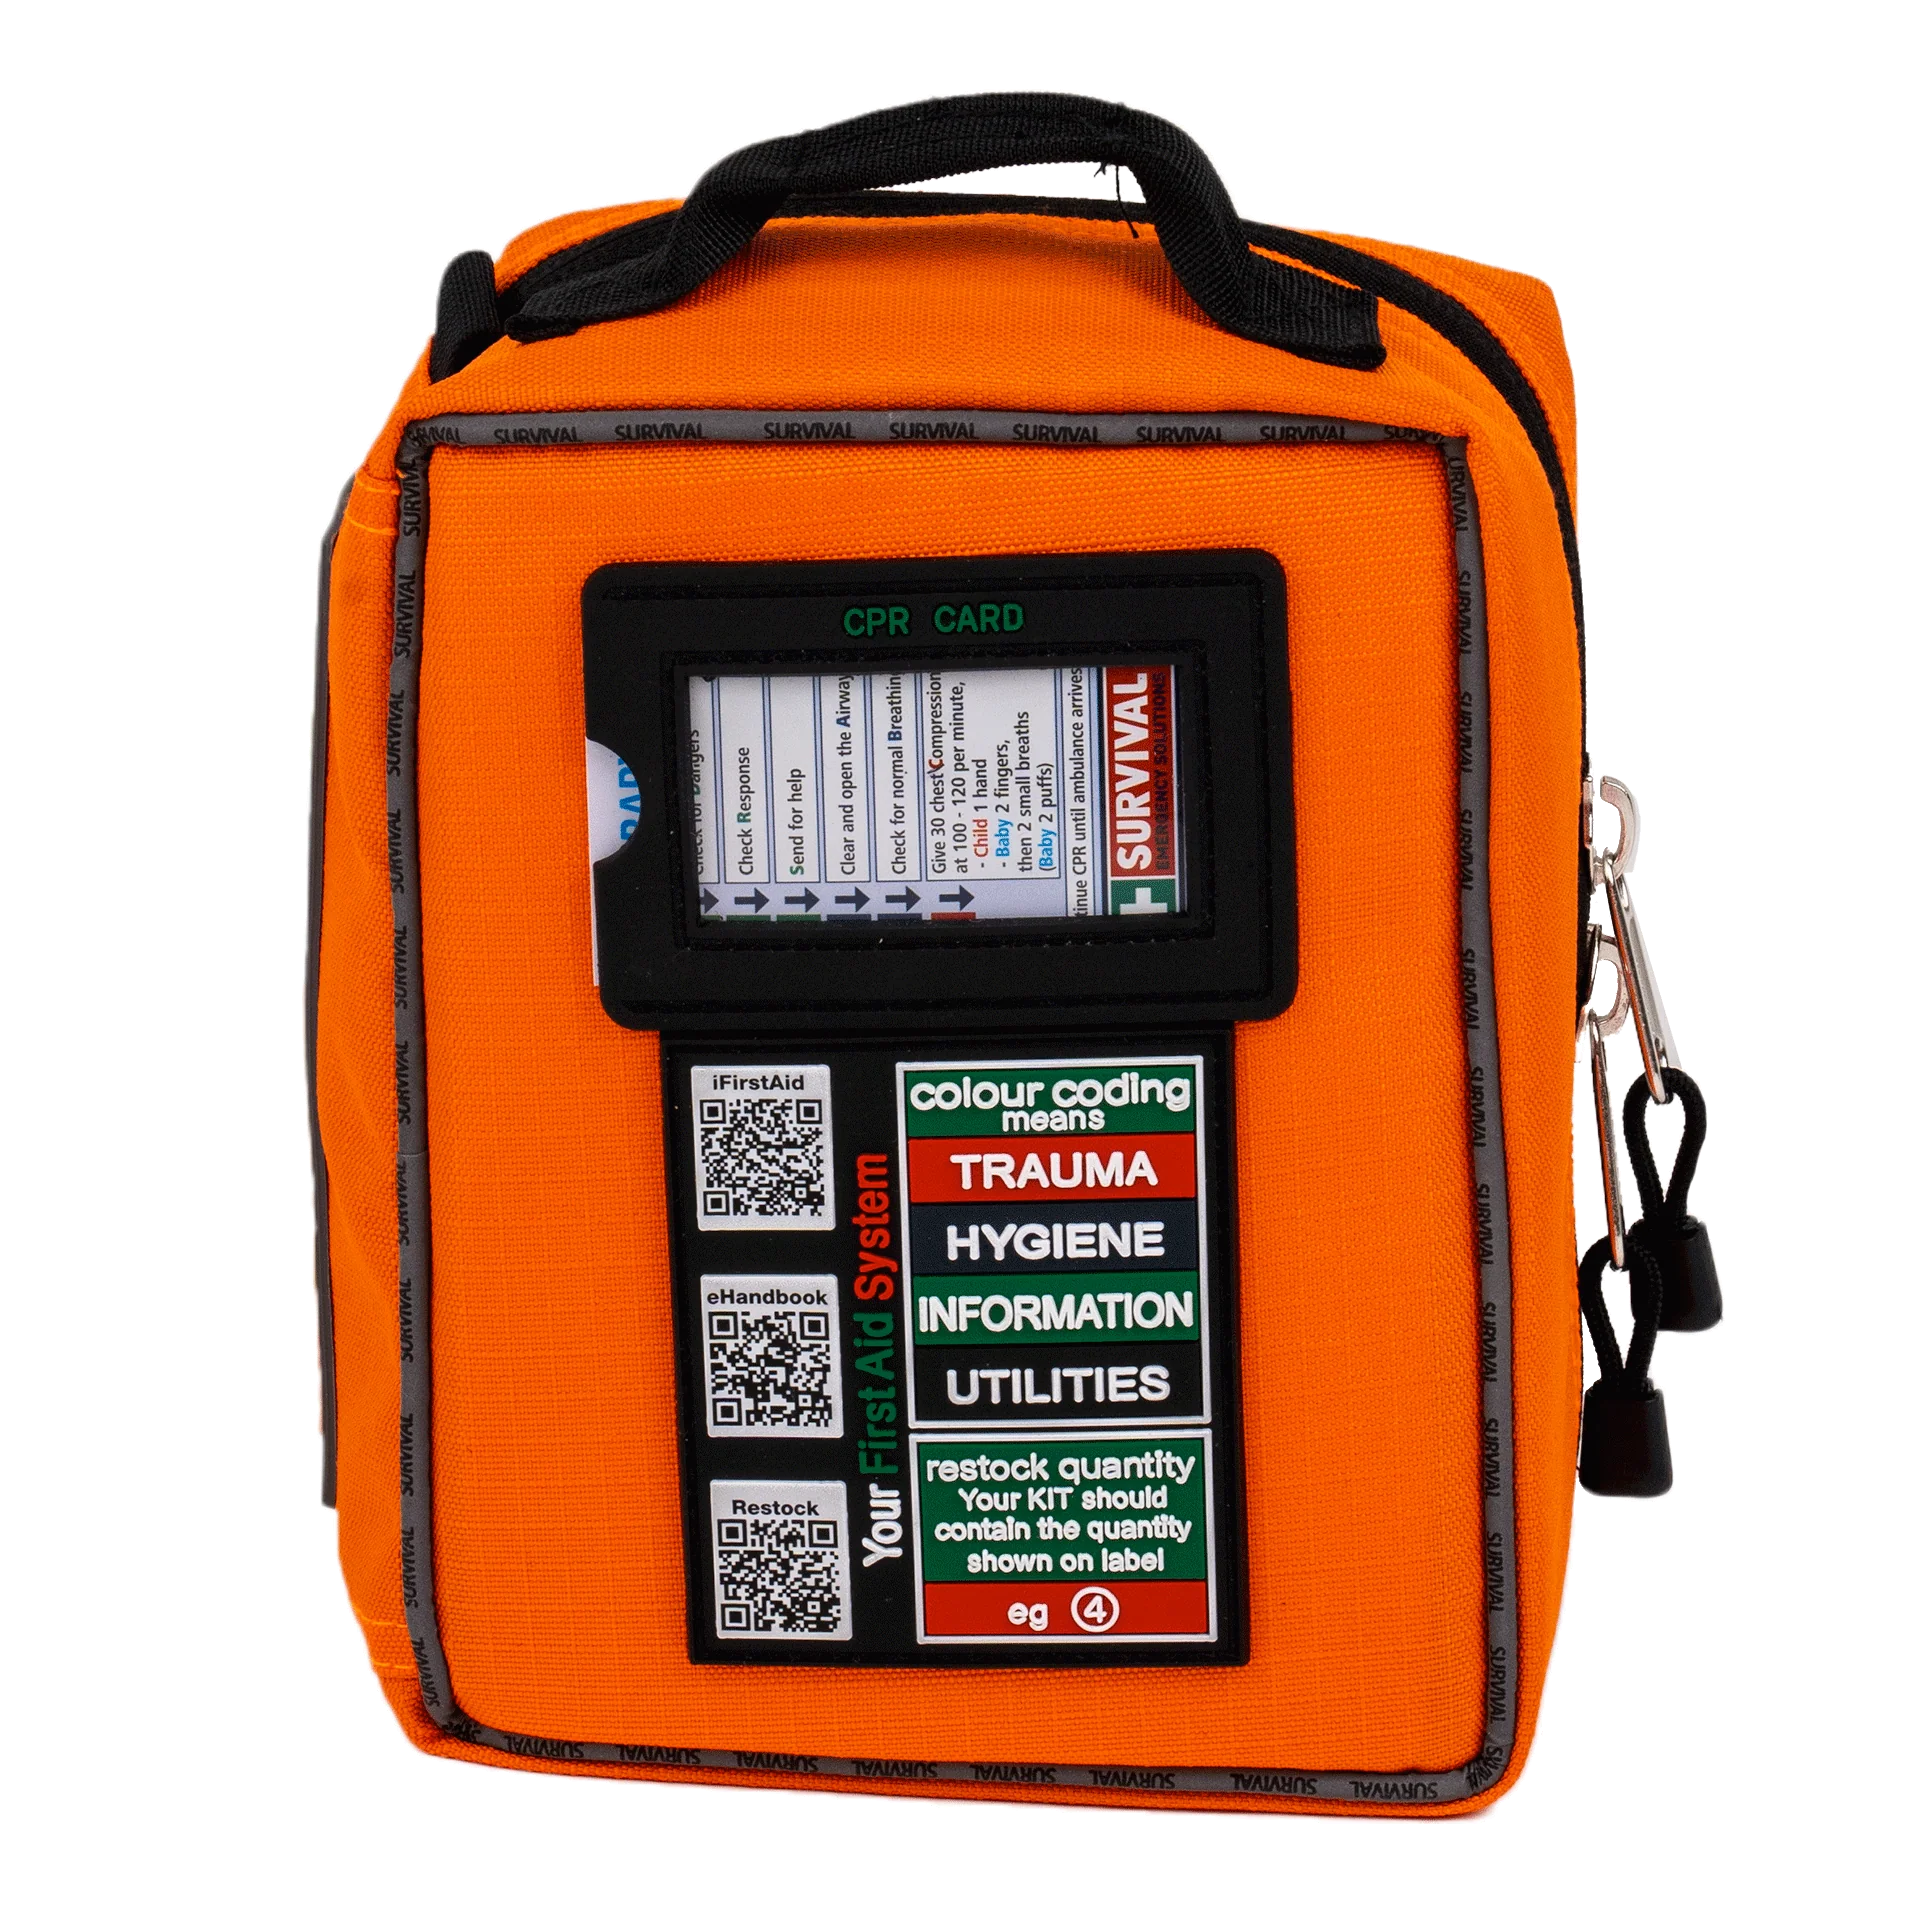 Survival MAXTRAX Vehicle First Aid Kit